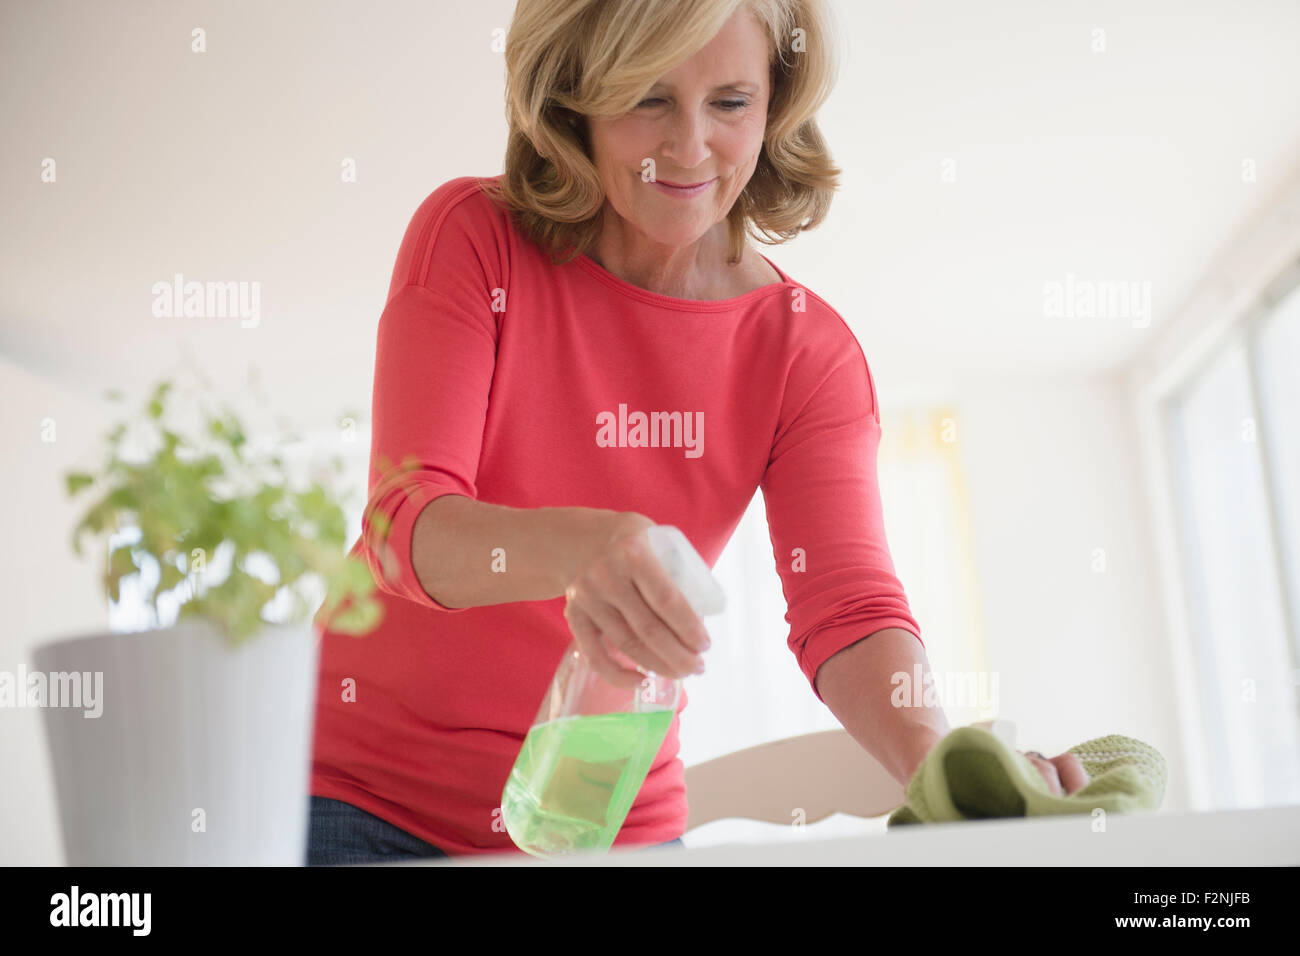 Caucasian woman cleaning table Stock Photo